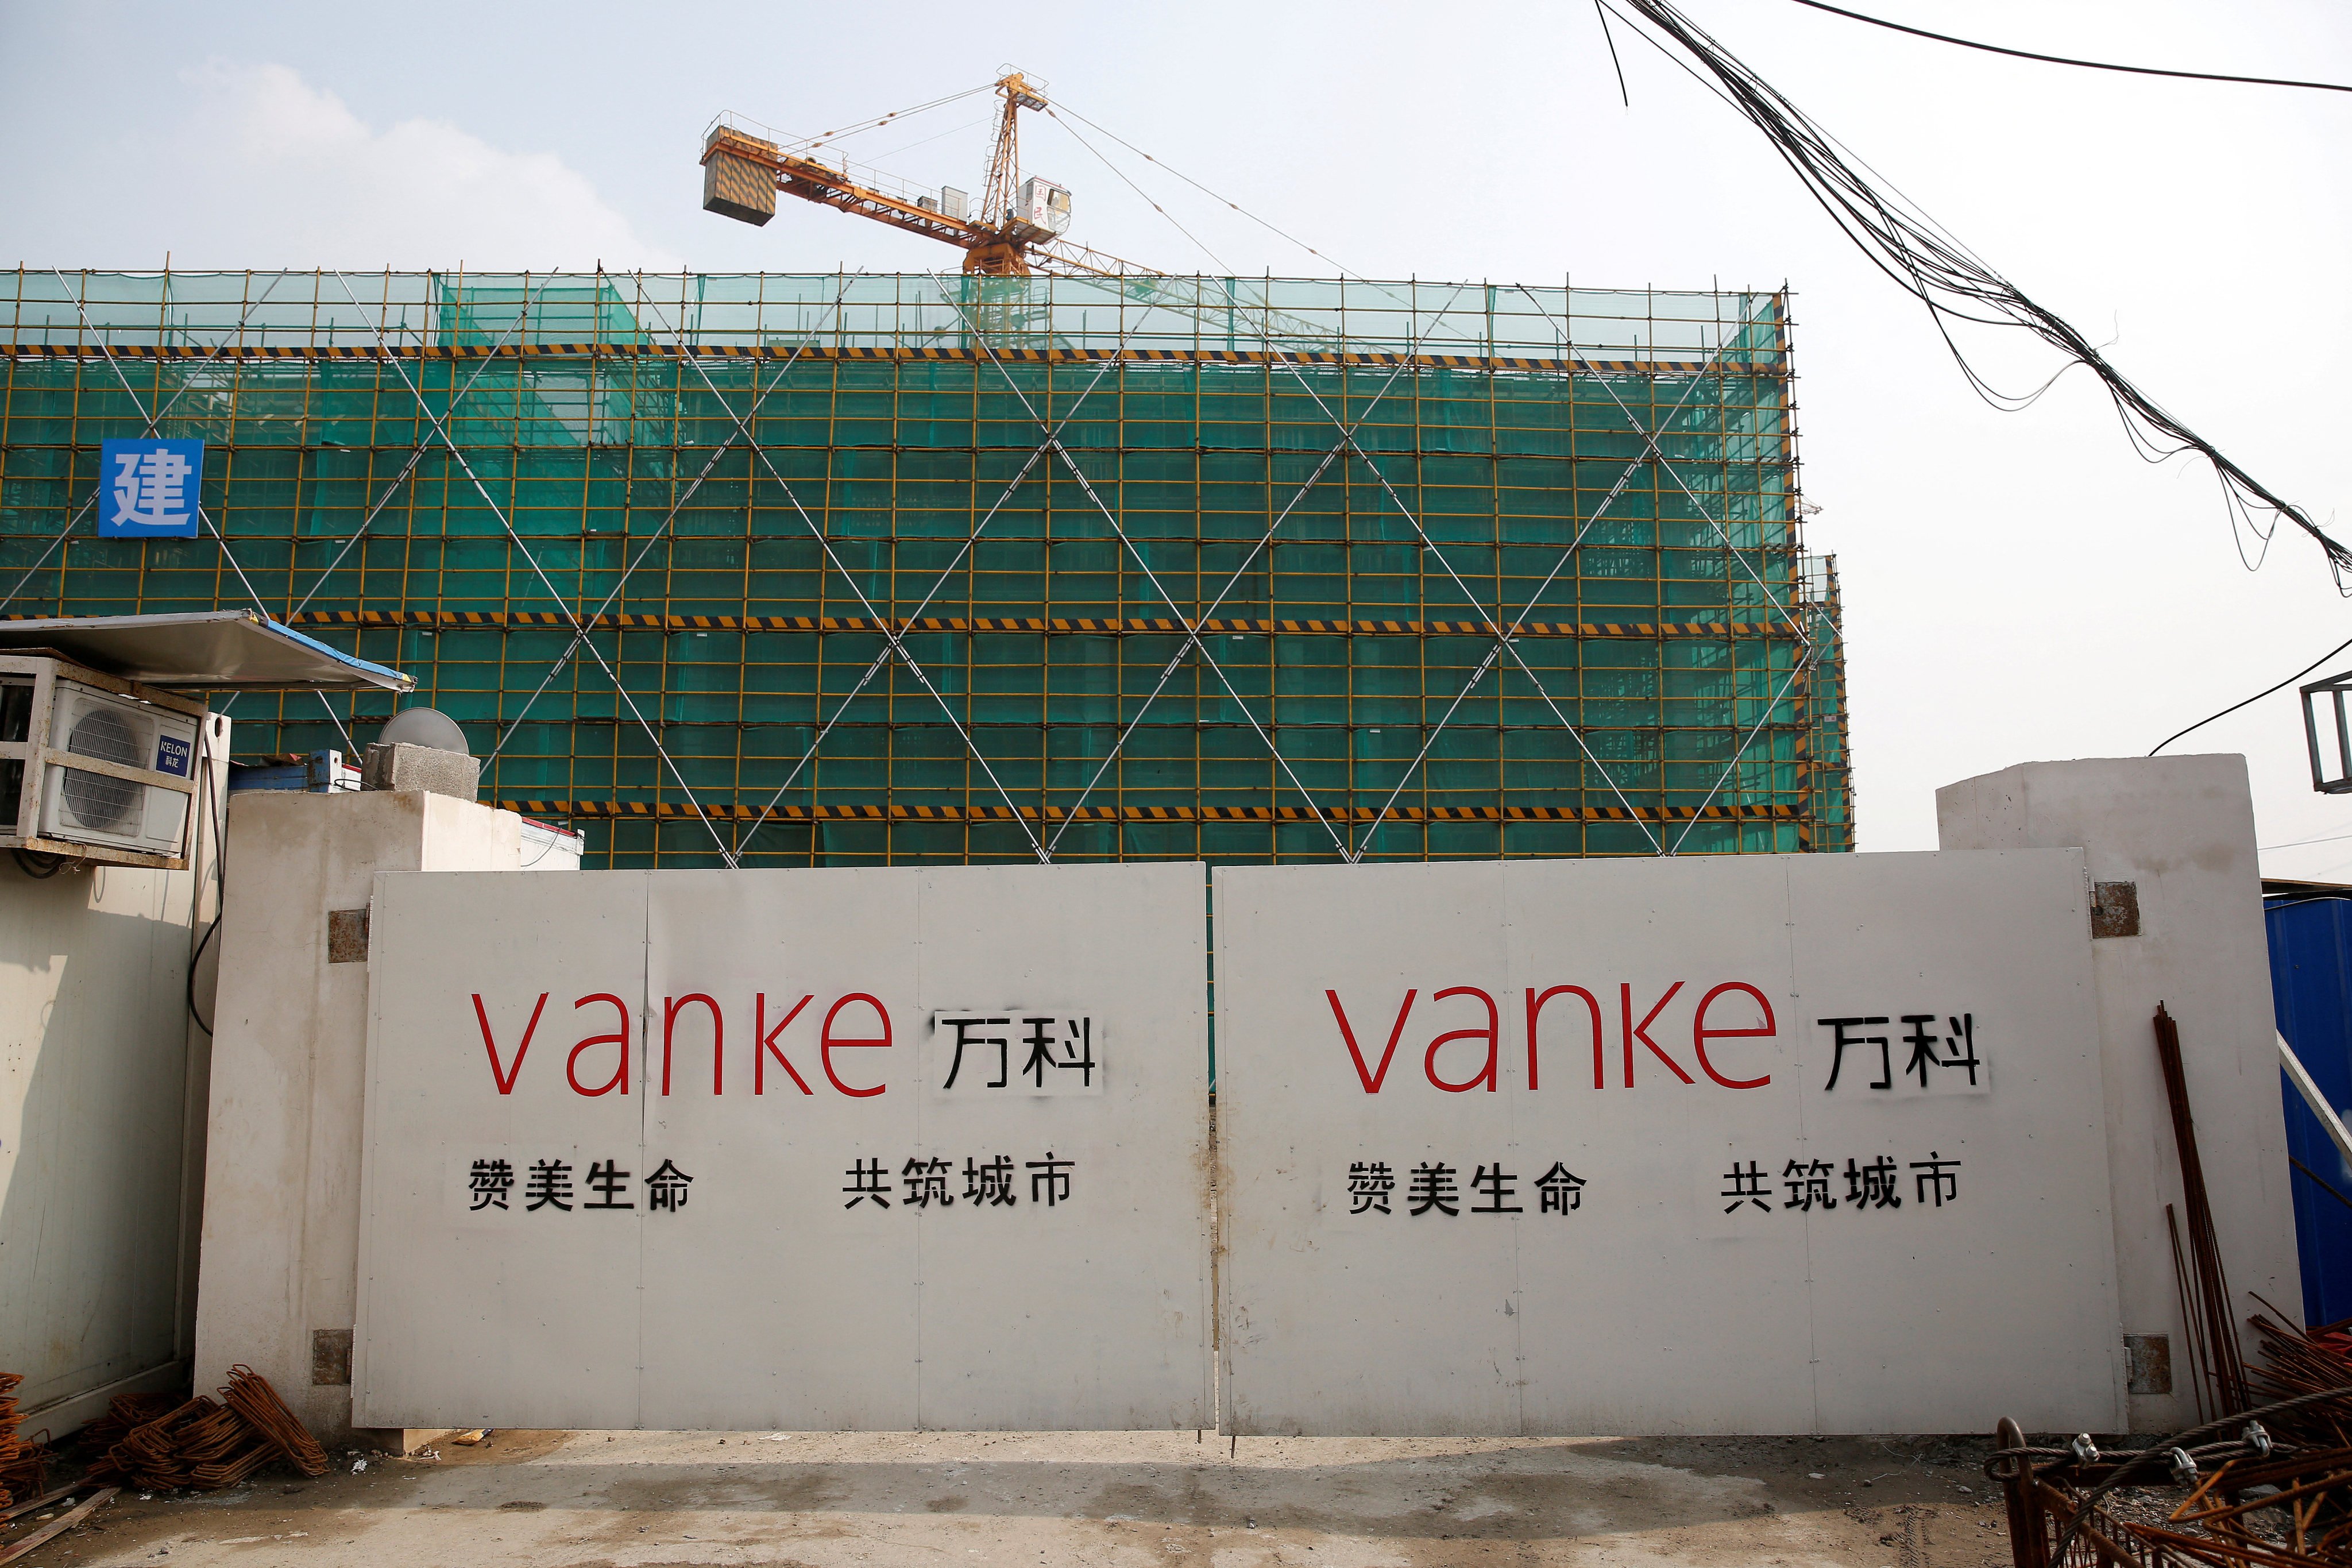 China Vanke, one of the country’s largest property developers, recently saw its credit rating downgraded, fuelling worries over perpetual woes in the real estate sector. Photo: Reuters